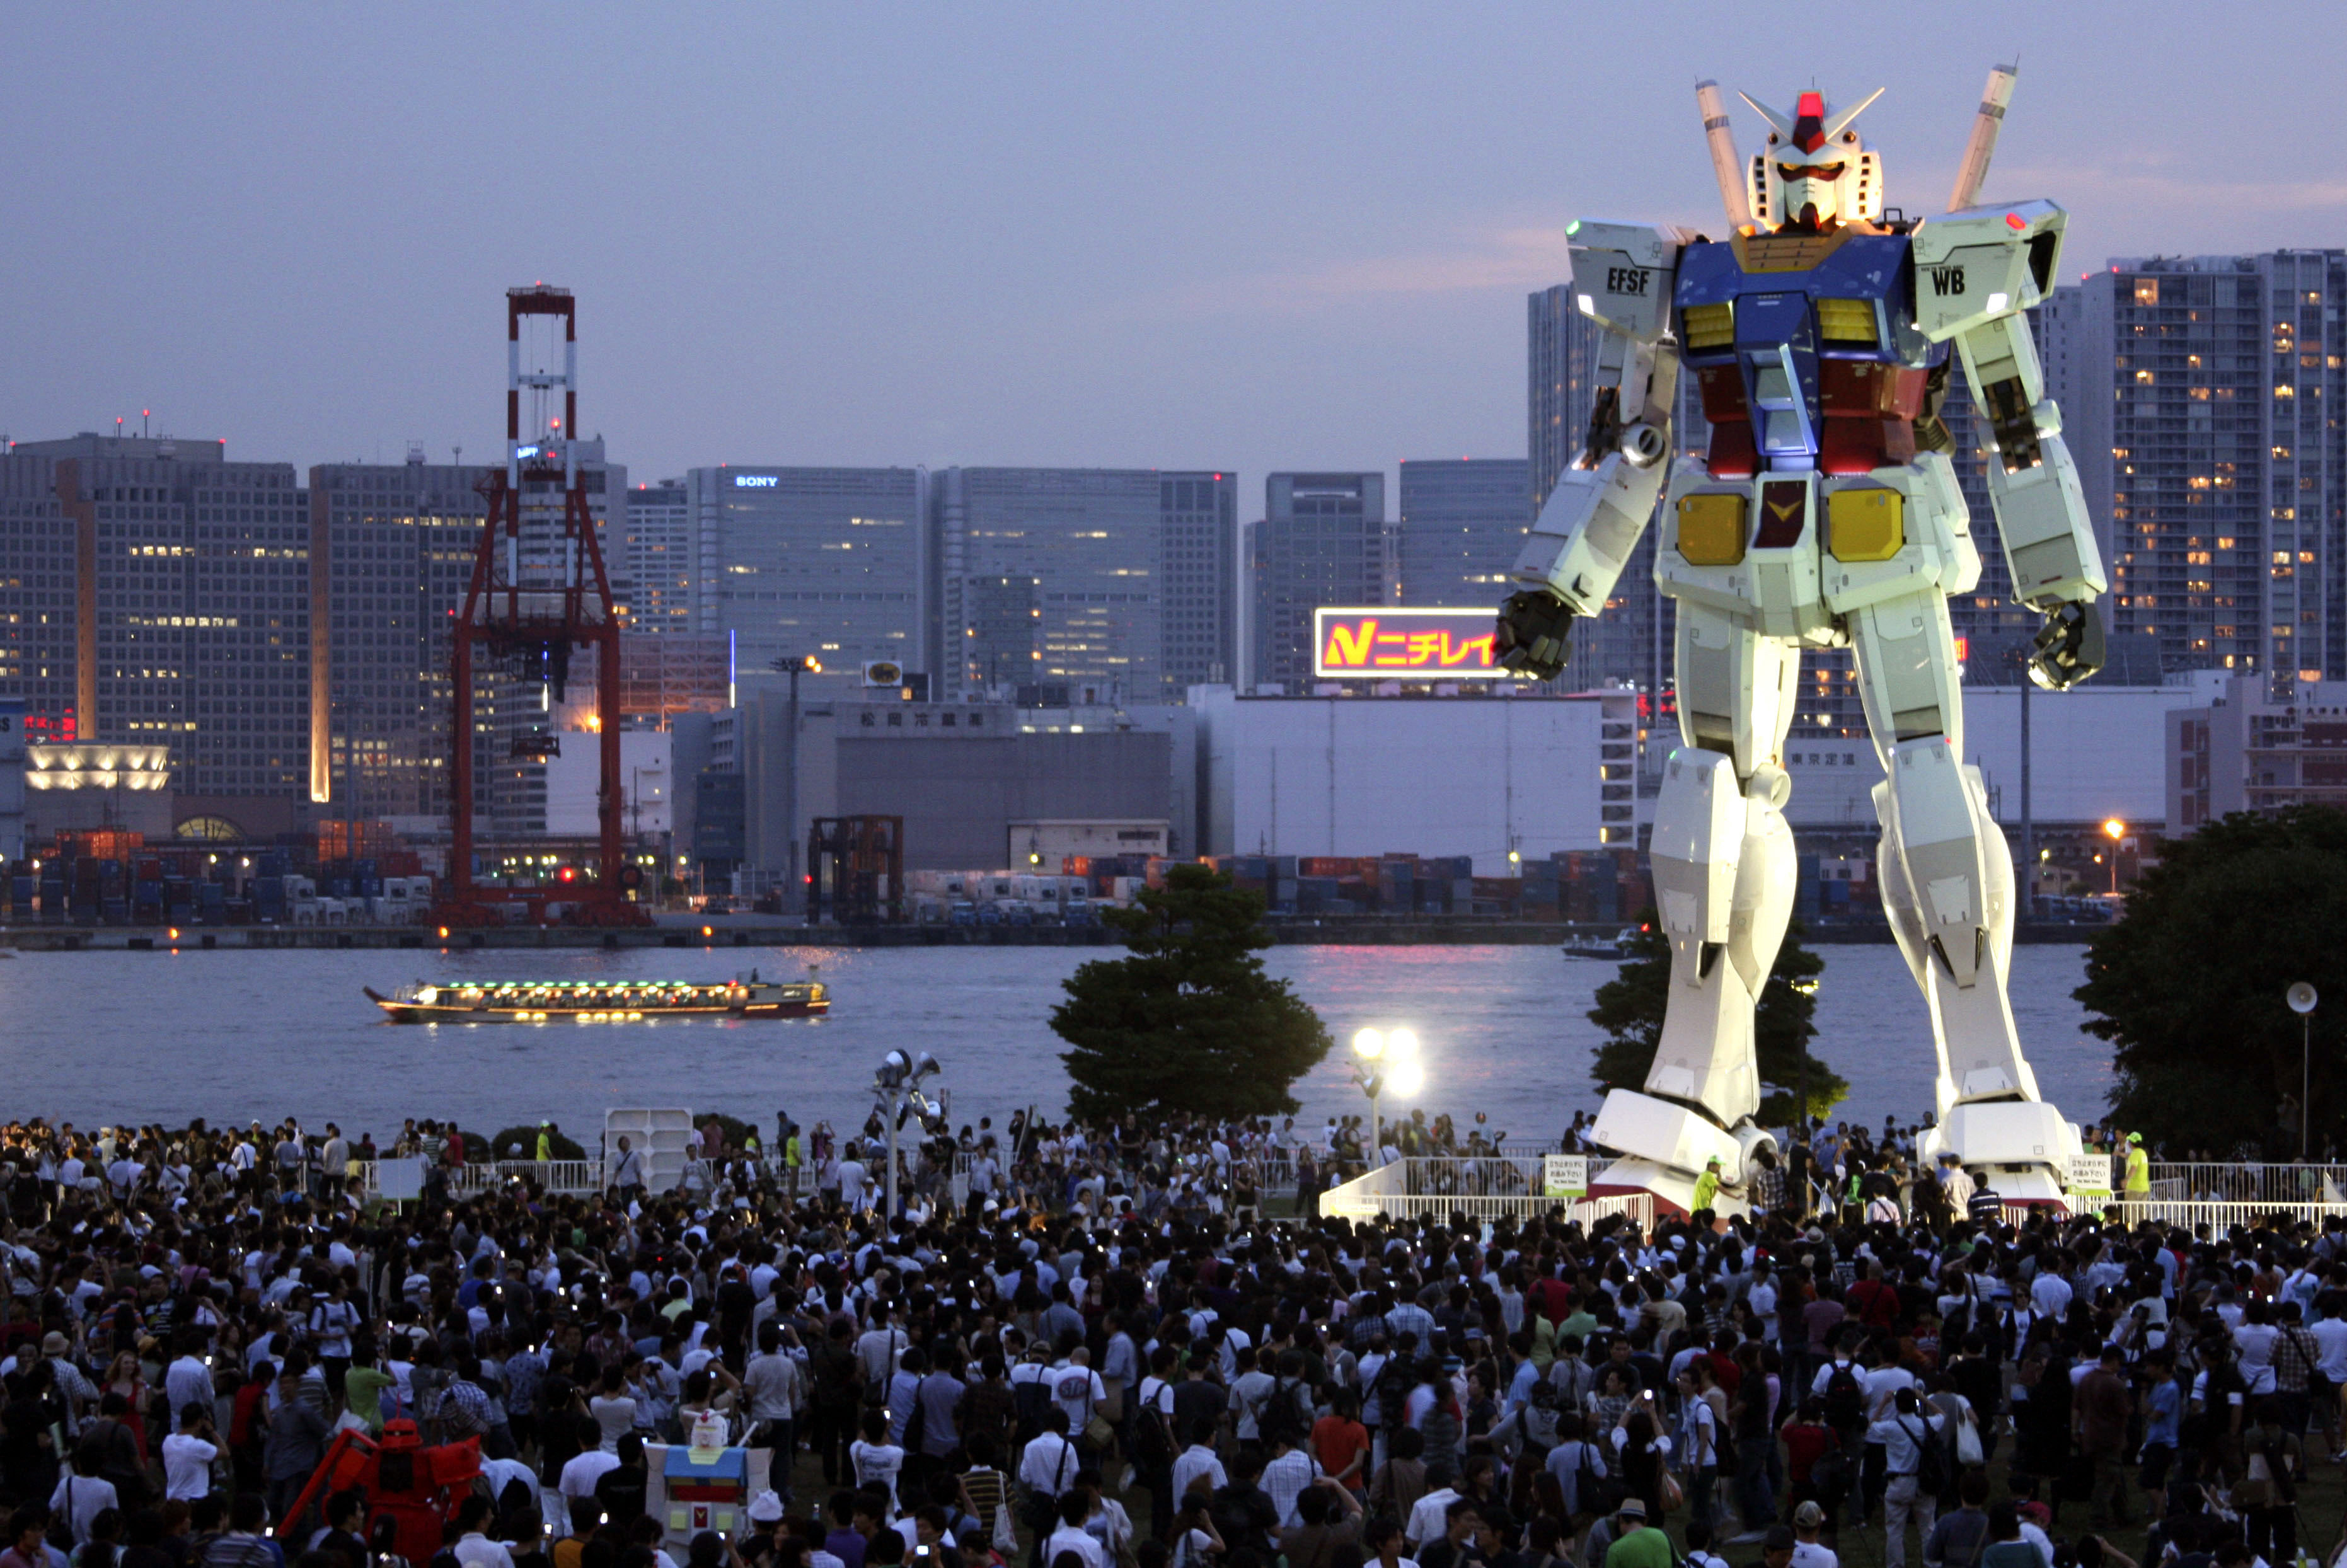 Giant robots officially fly the flag for cool Japan | The Japan Times